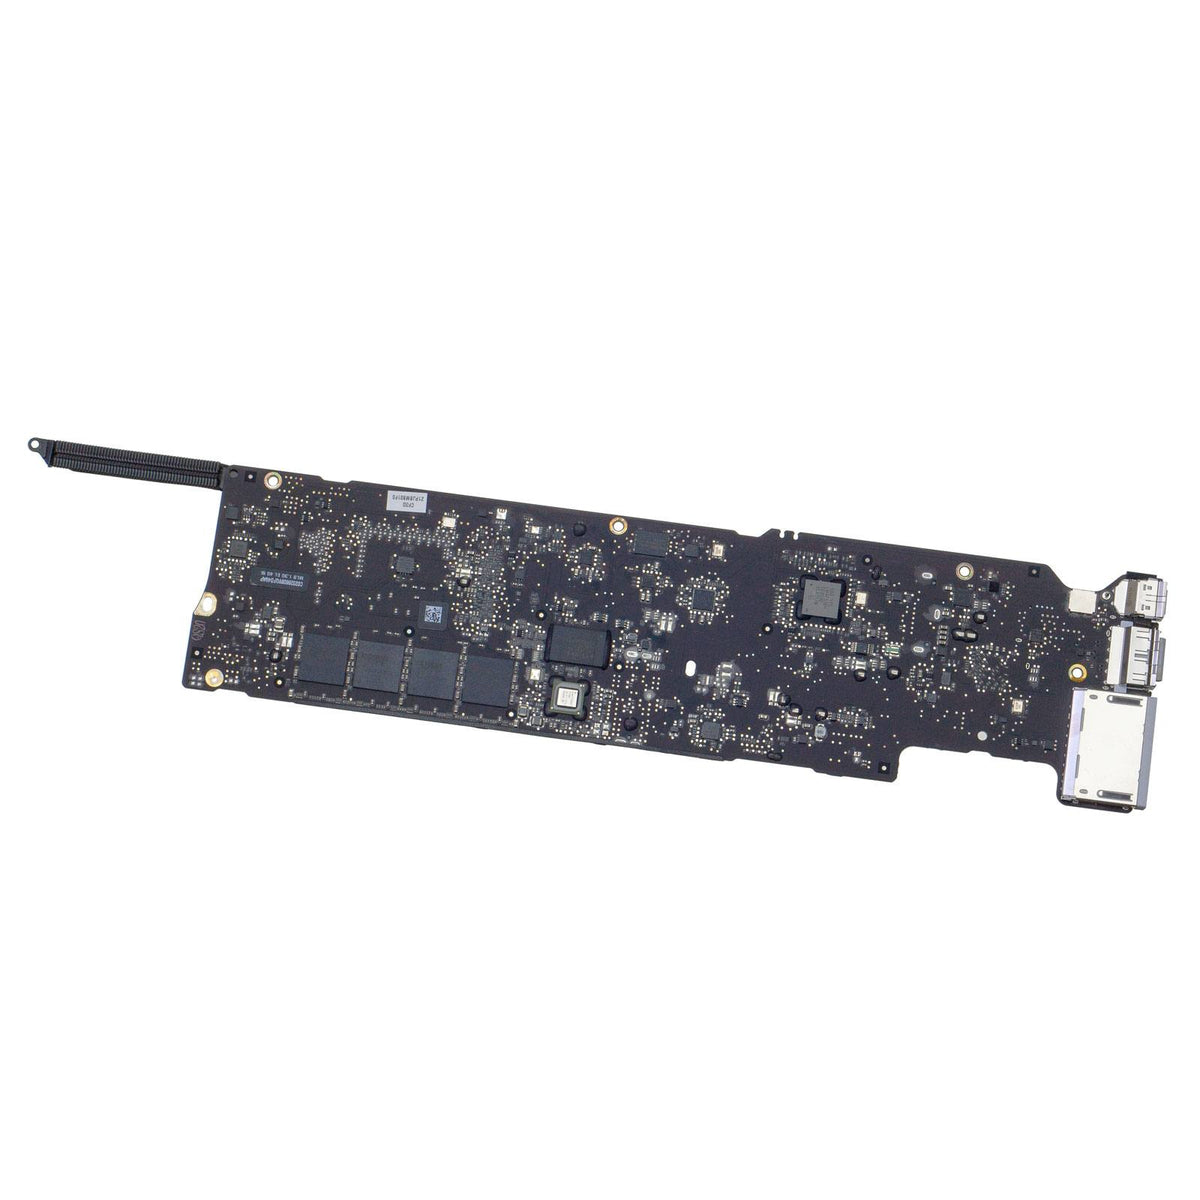 MOTHERBOARD FOR MACBOOK AIR 13" A1466 (EARLY 2015 - MID 2017)